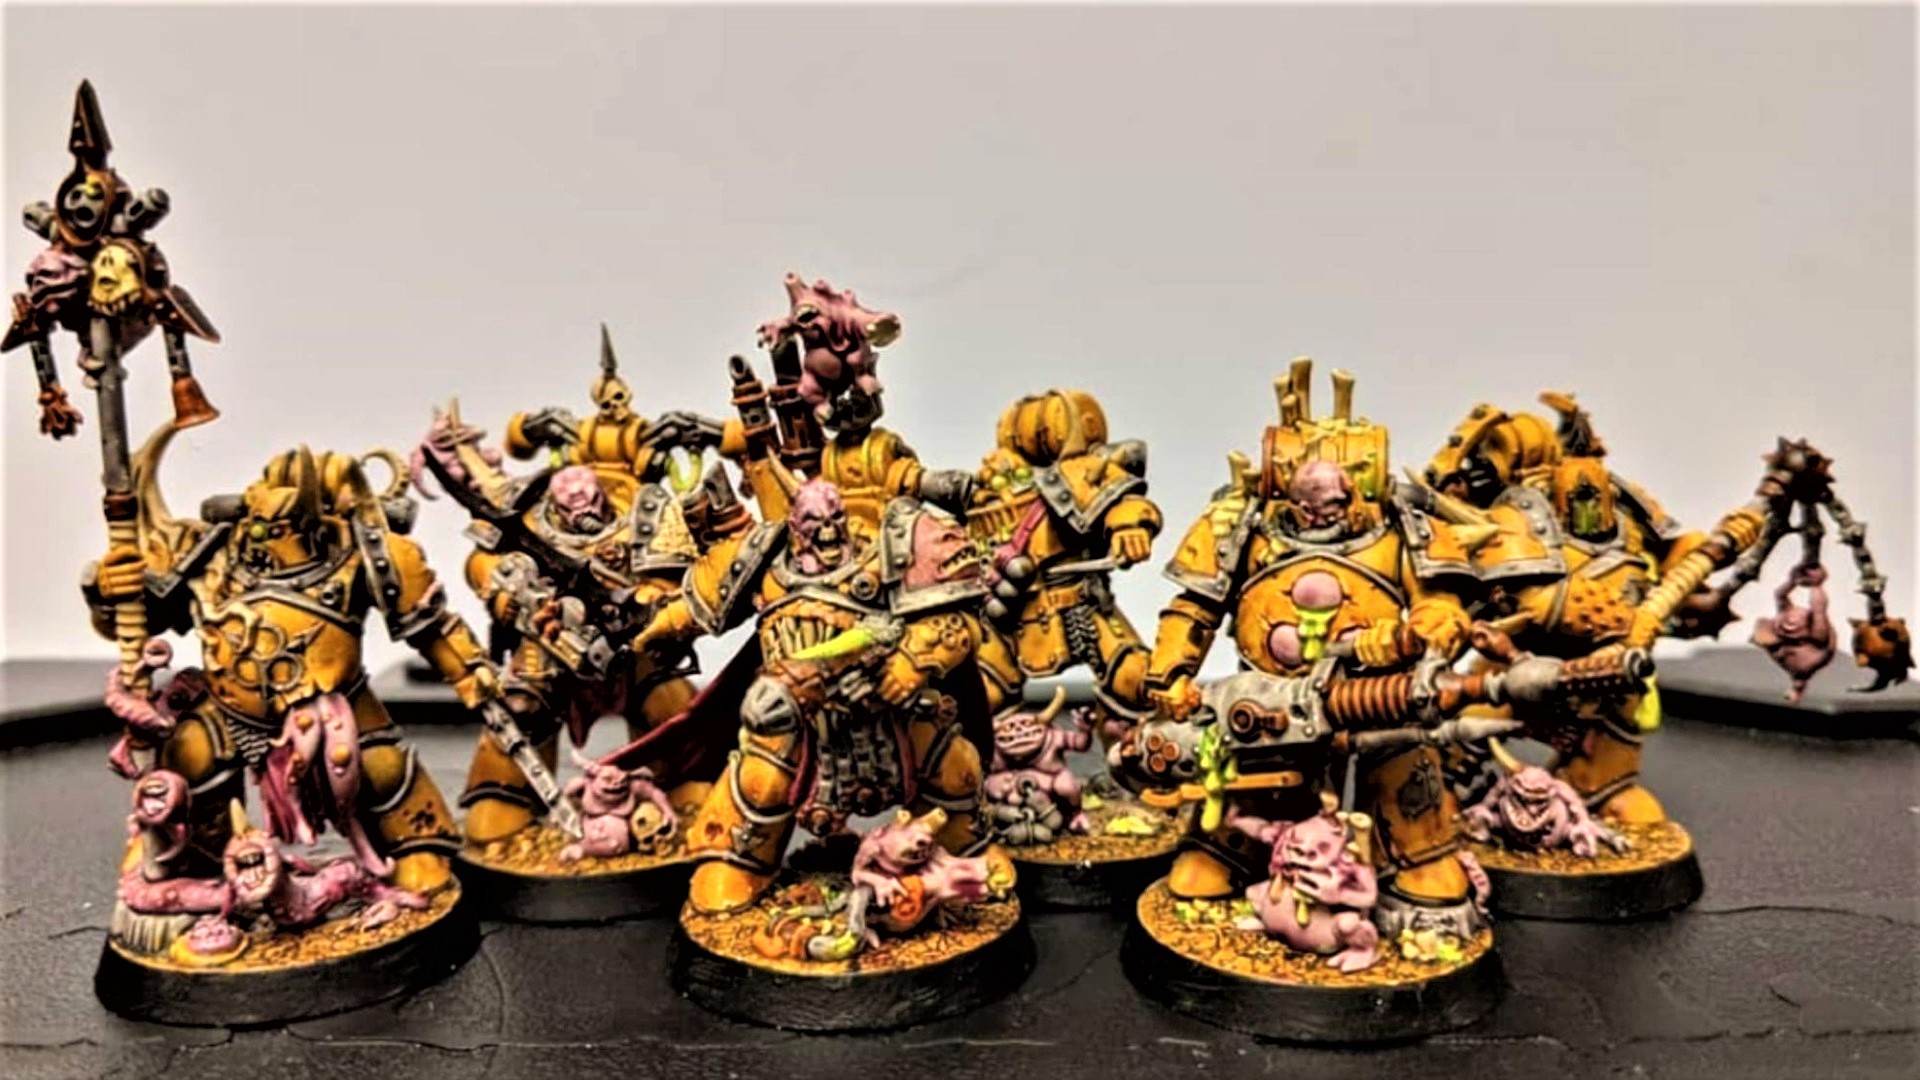 MANY UNITS TO CHOOSE FROM WARHAMMER 40K CHAOS ARMY DEATH GUARD POXWALKERS